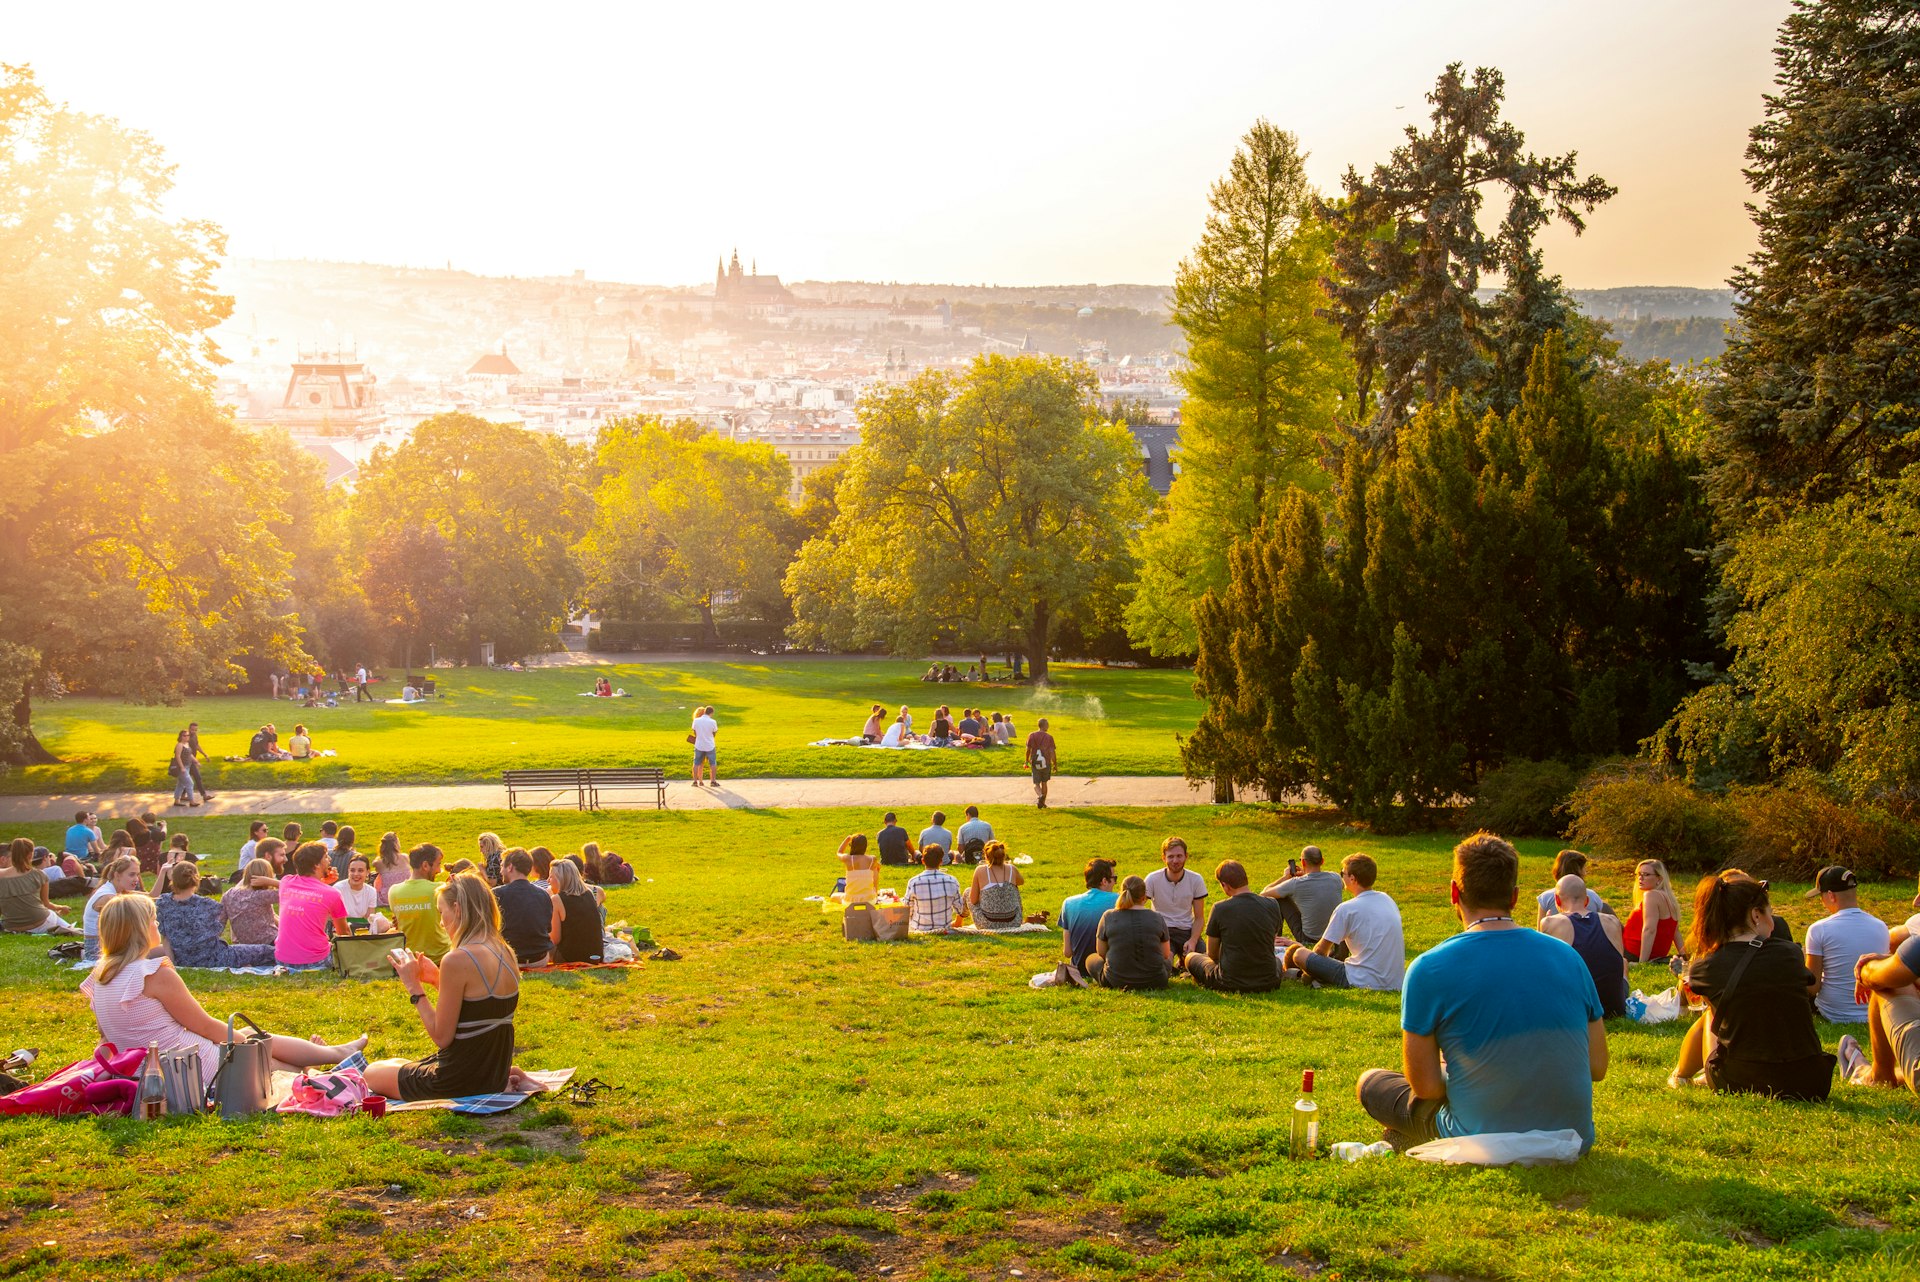  Sunset in Rieger Gardens, Riegrovy sady, in Prague. Many people sitting in the grass and enjoying sunny summer evening and lookout of Prague historical city